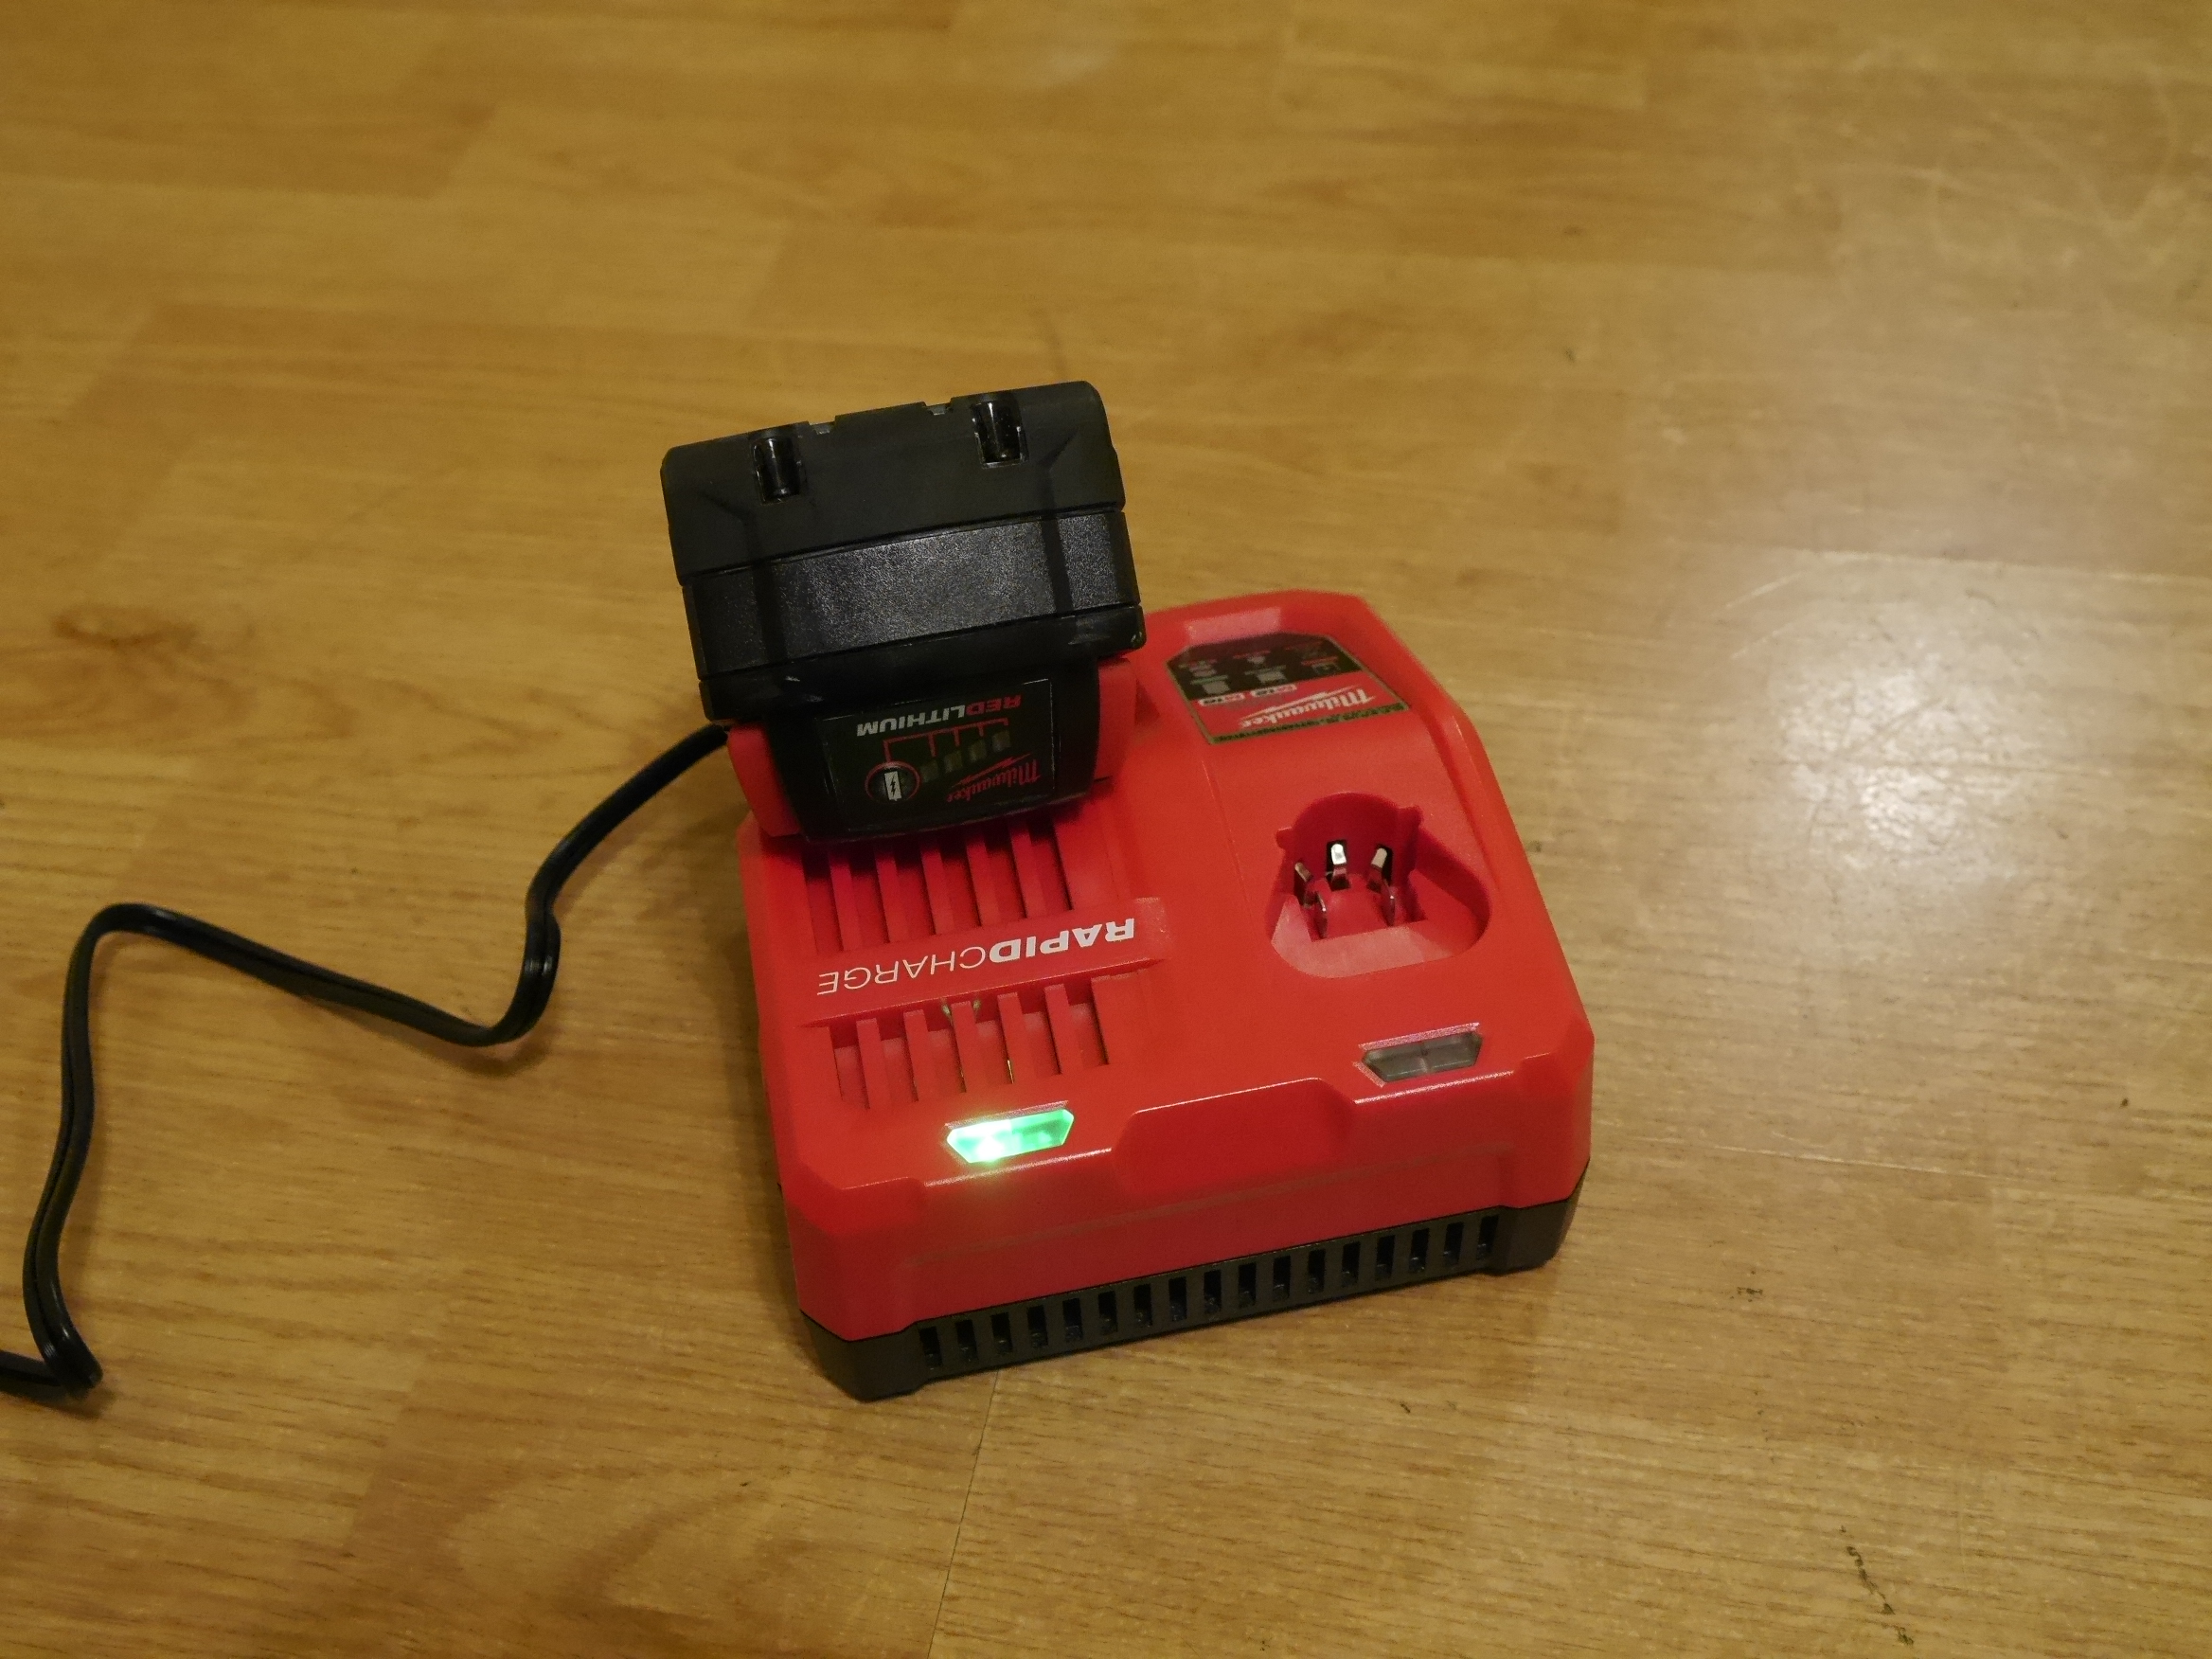 Makita Battery Charger Flashing Red And Green - Best ...